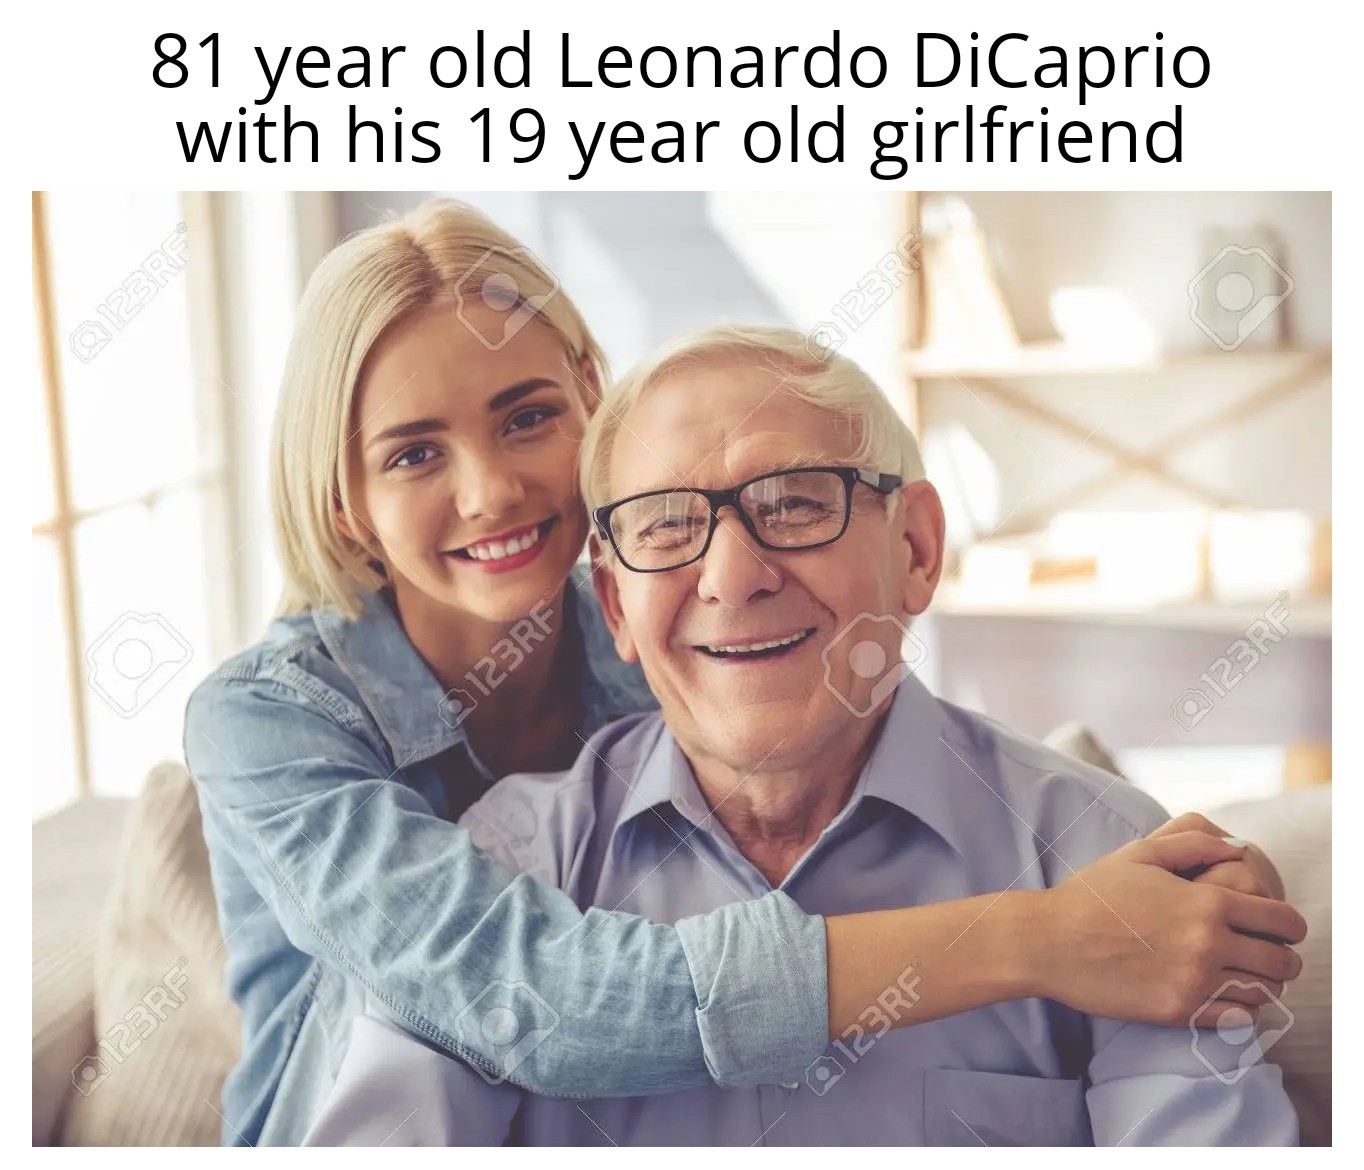 daily dose of randoms - older parents and daughter - 81 year old Leonardo DiCaprio with his 19 year old girlfriend 123RF 123RF Minh 123RF 20 1238 123RF 123RF